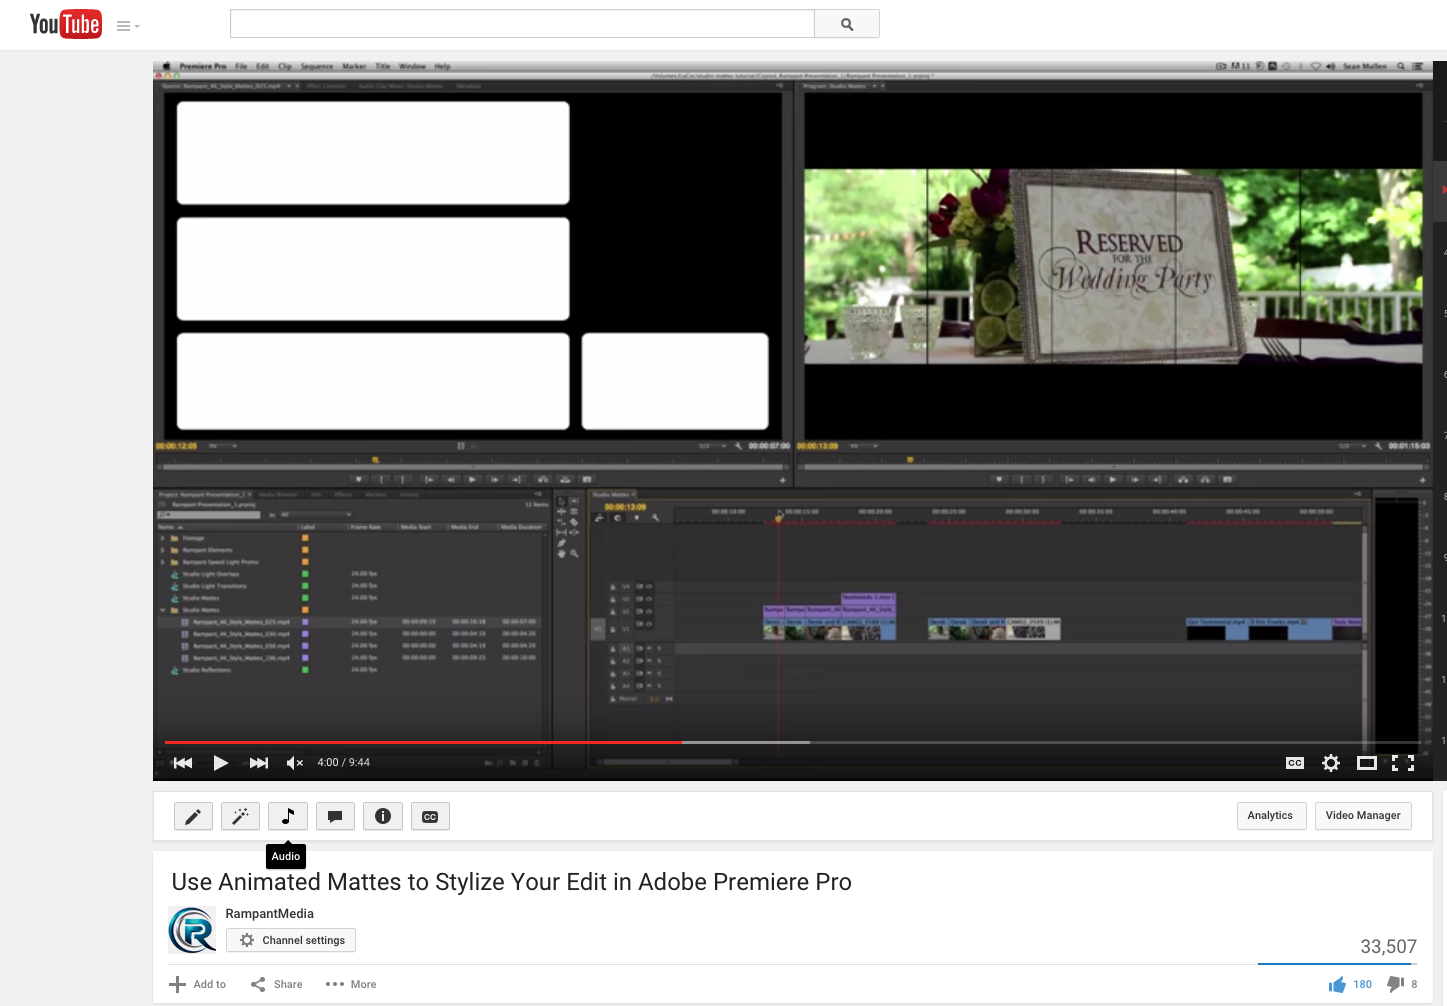 Use Animated Mattes to Stylize Your Edit in Adobe Premiere Pro